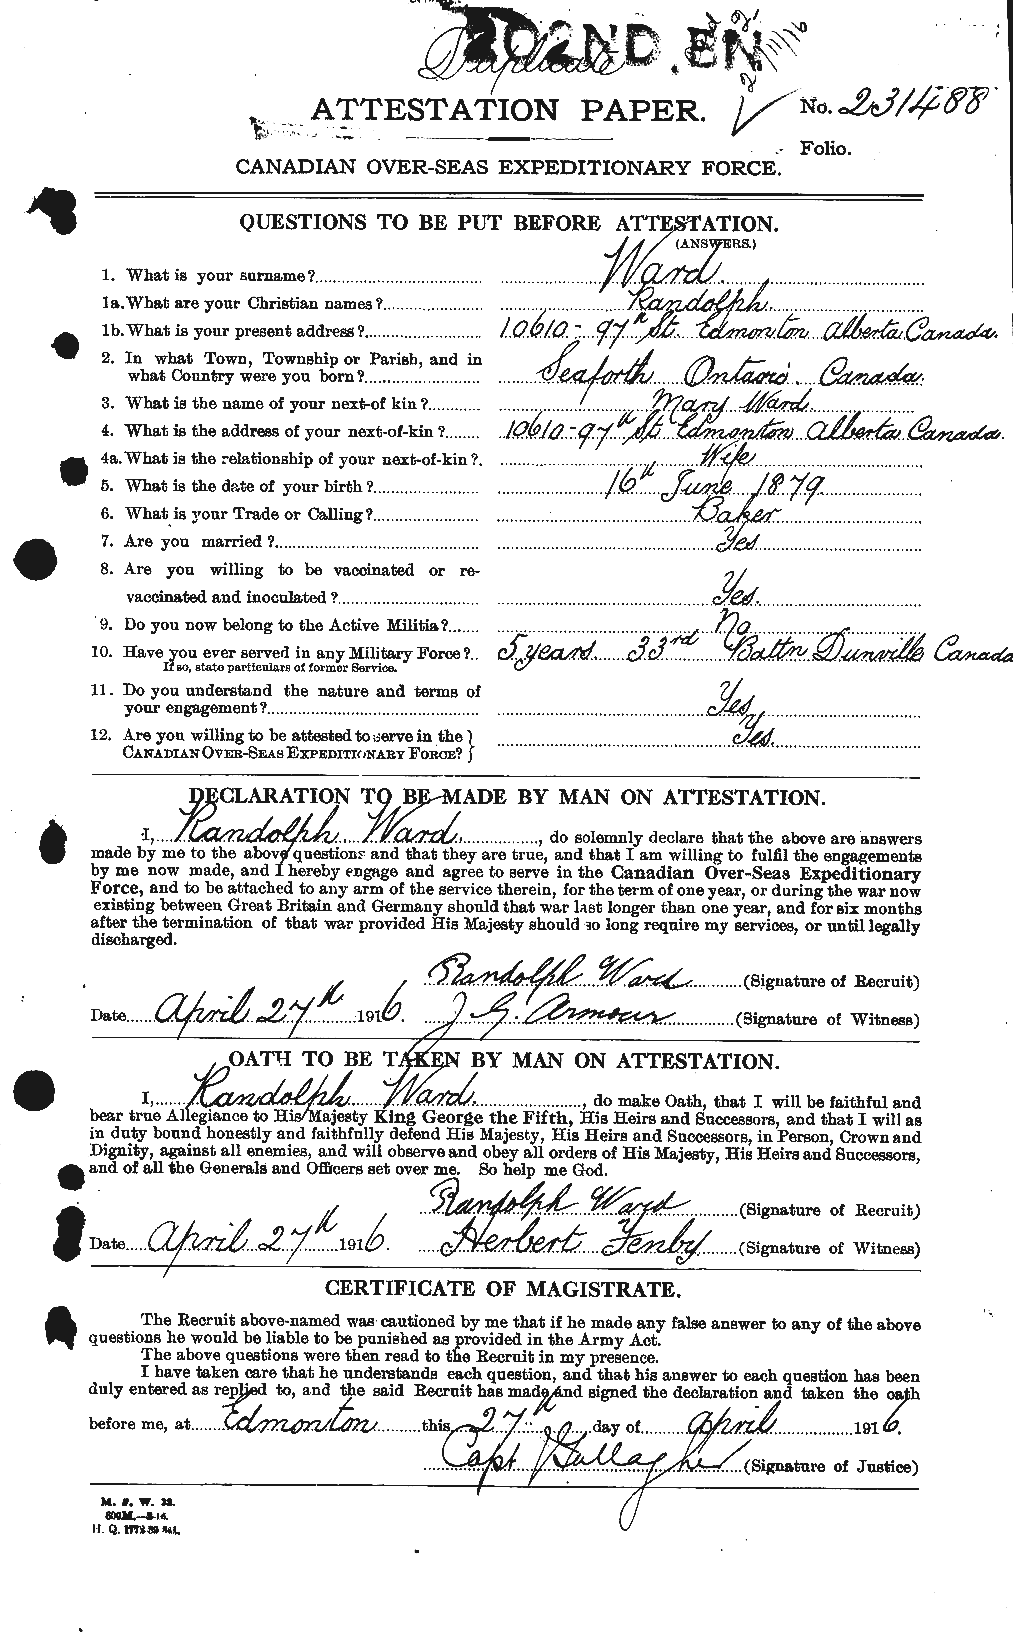 Personnel Records of the First World War - CEF 659636a